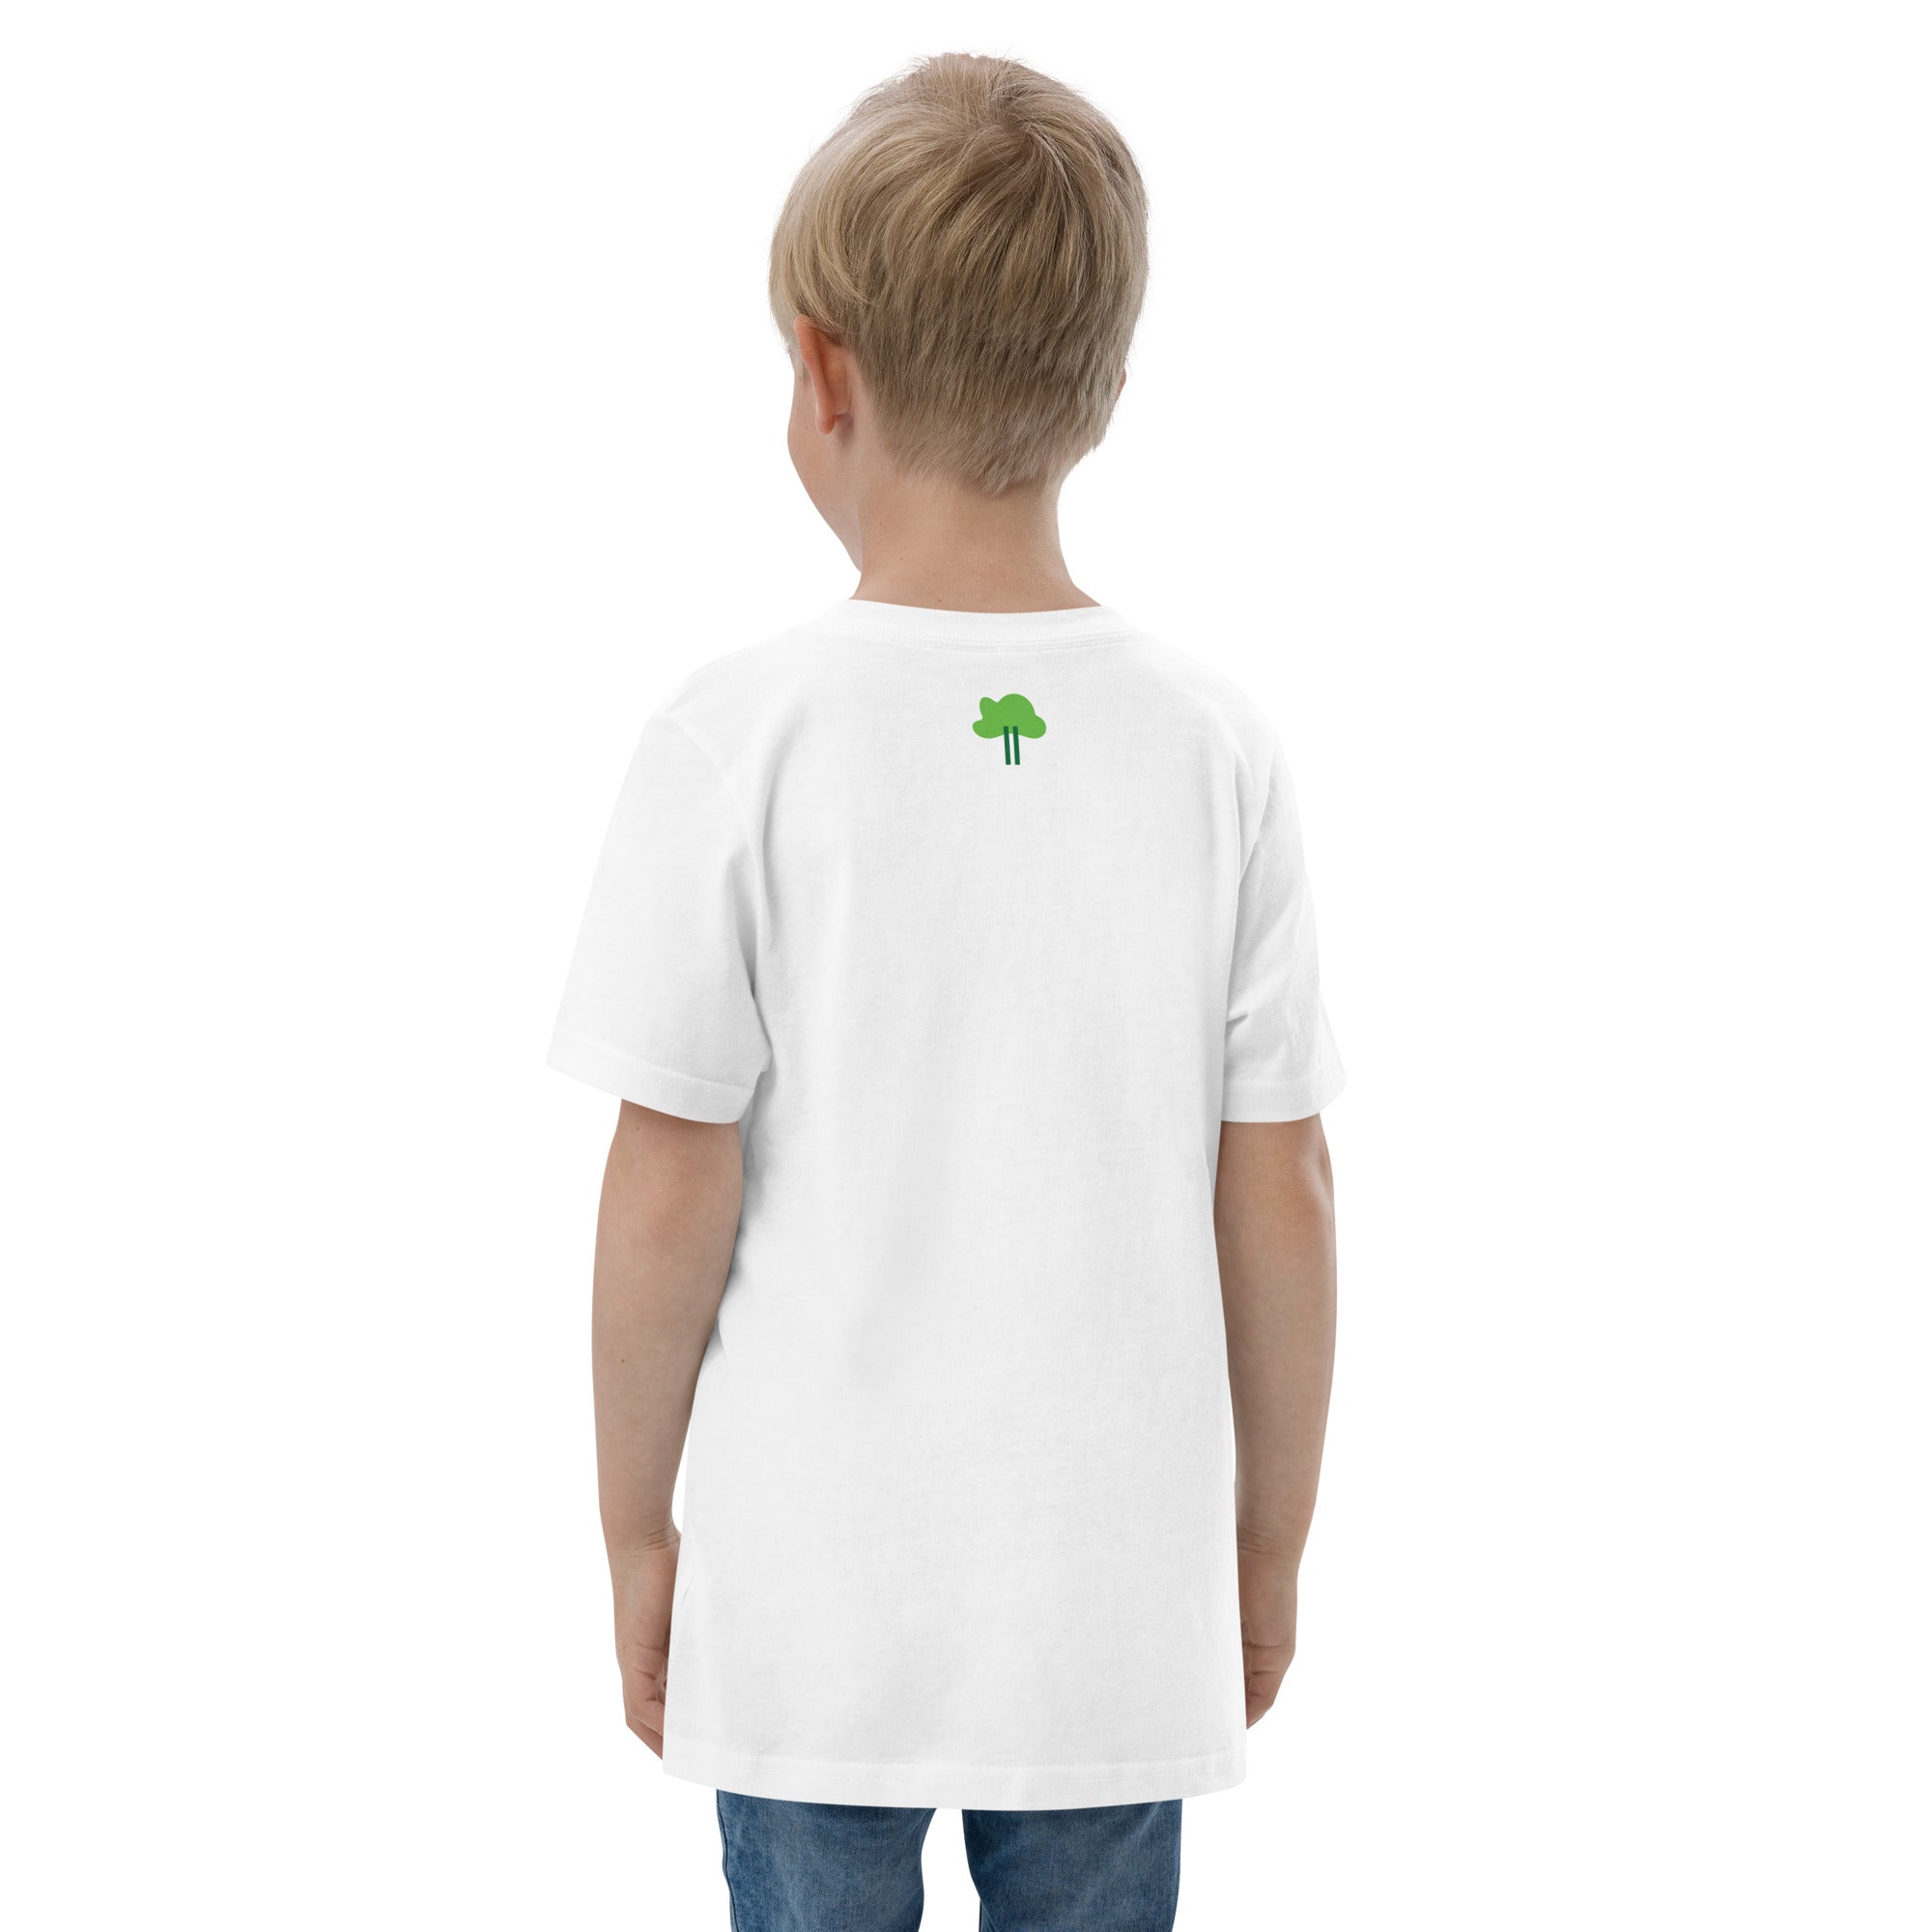 Las Pulgas | Youth jersey t-shirt